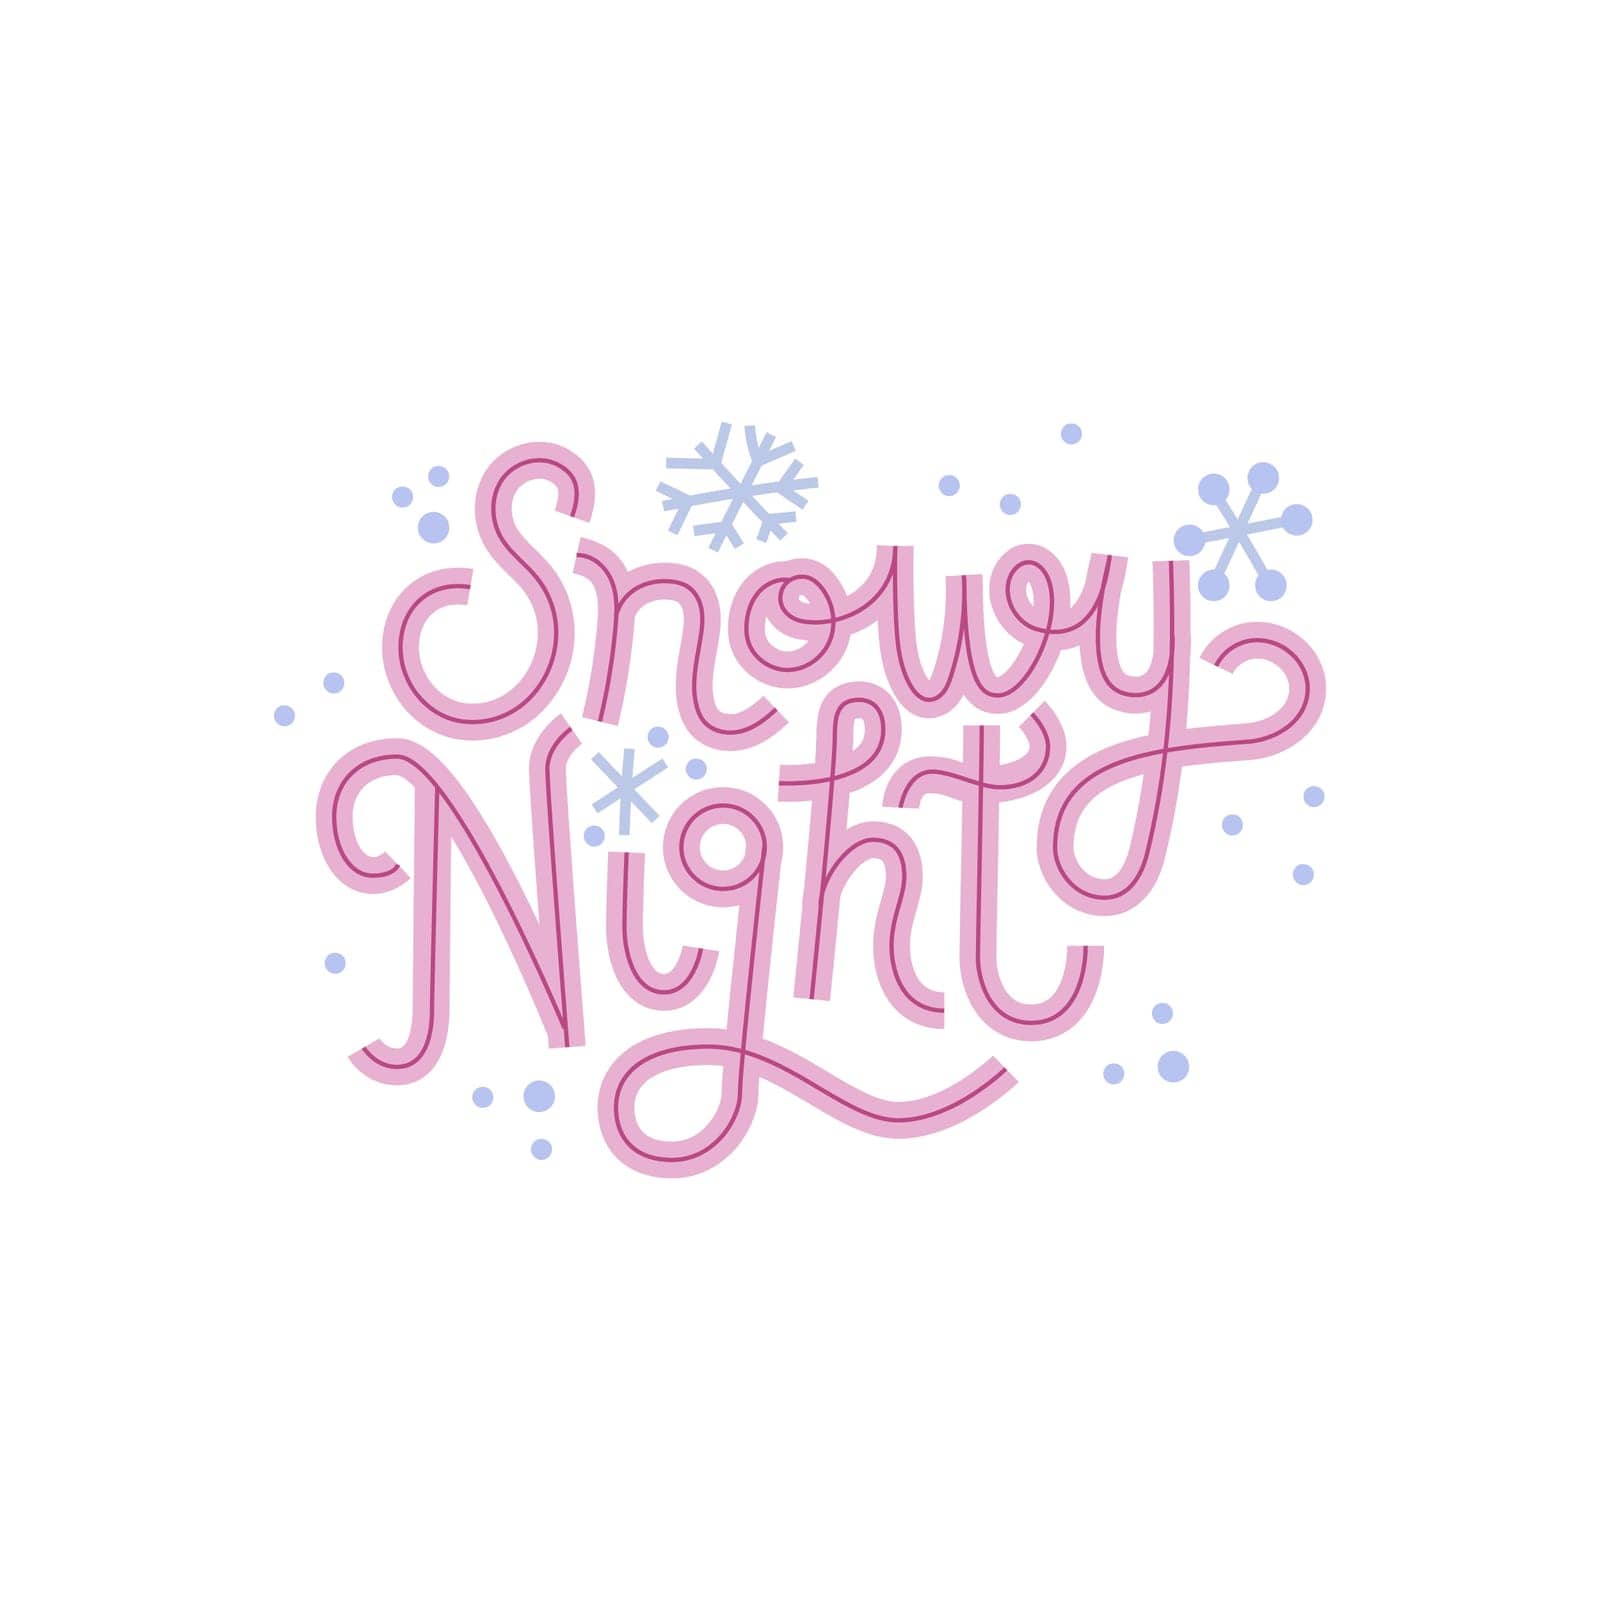 Snowy Night. Hand-drawn lettering with snowflake decor. Isolated on a white background.